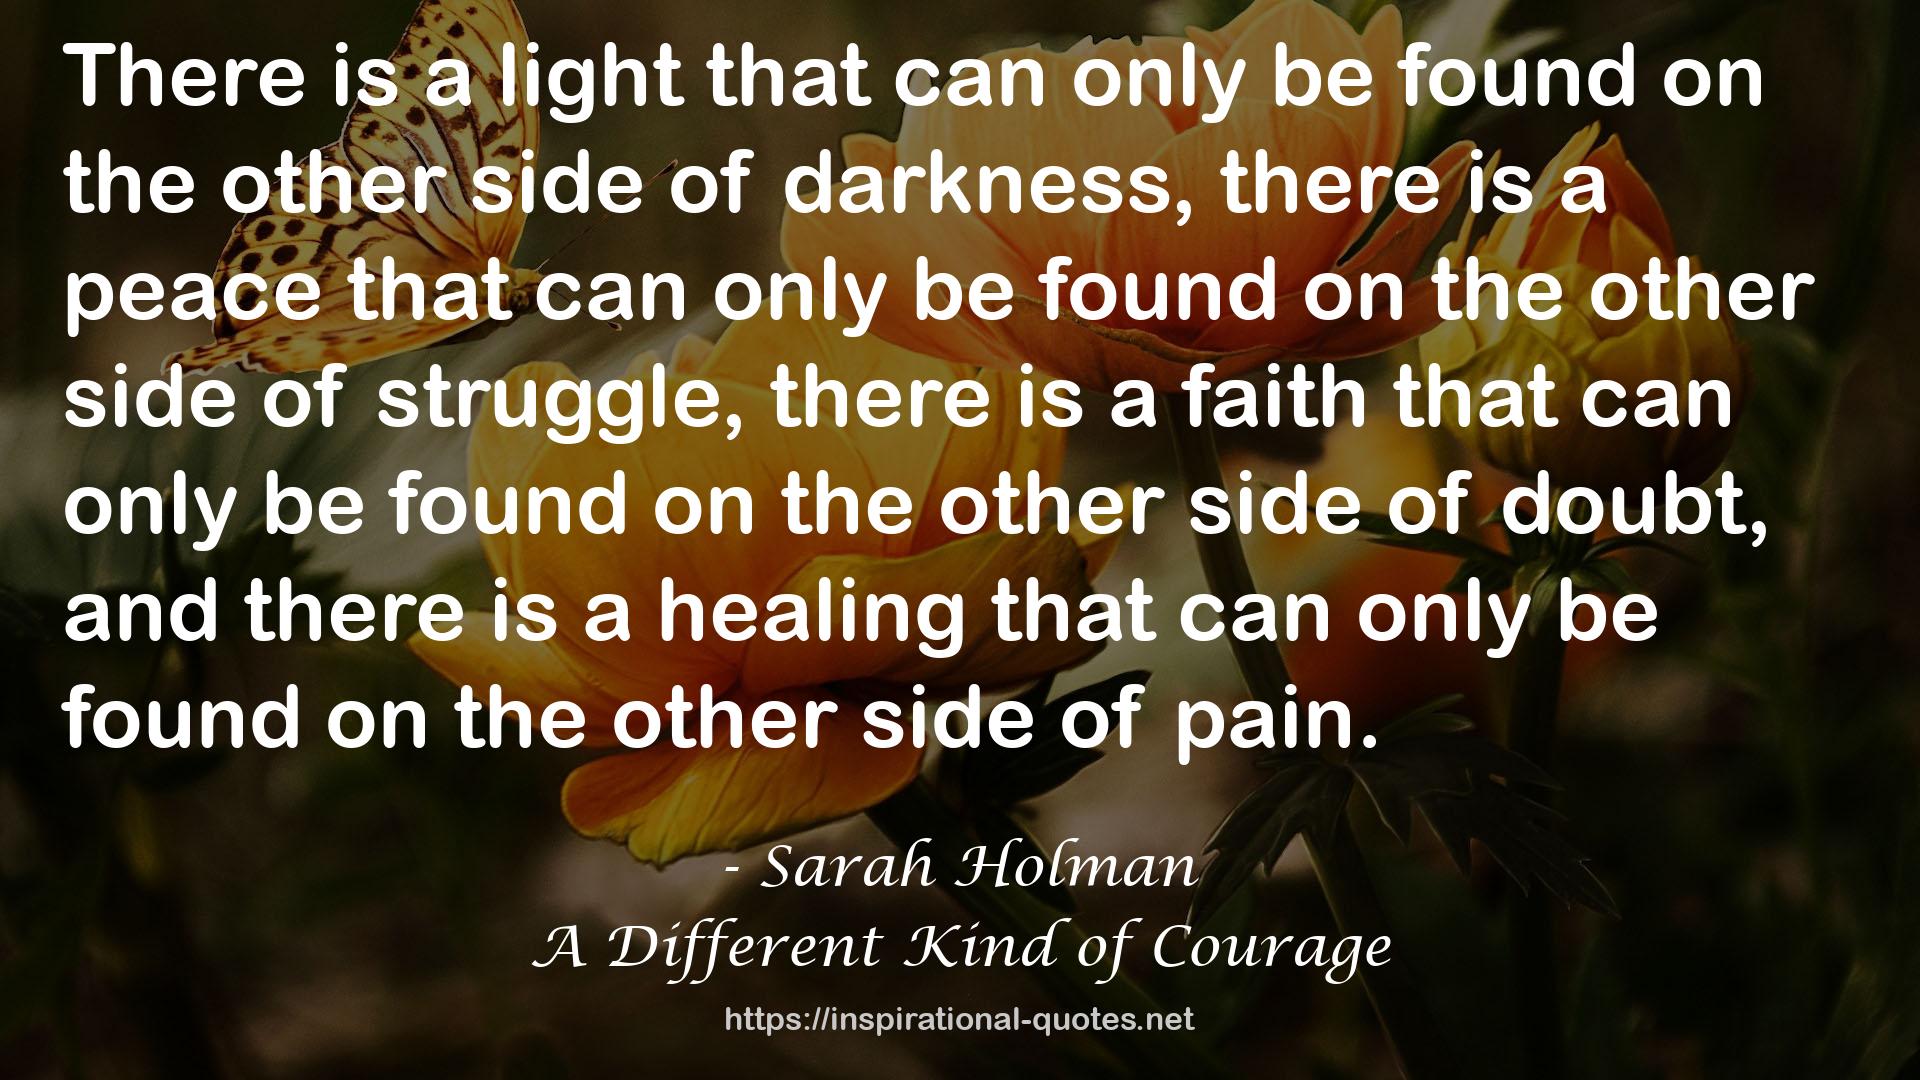 A Different Kind of Courage QUOTES